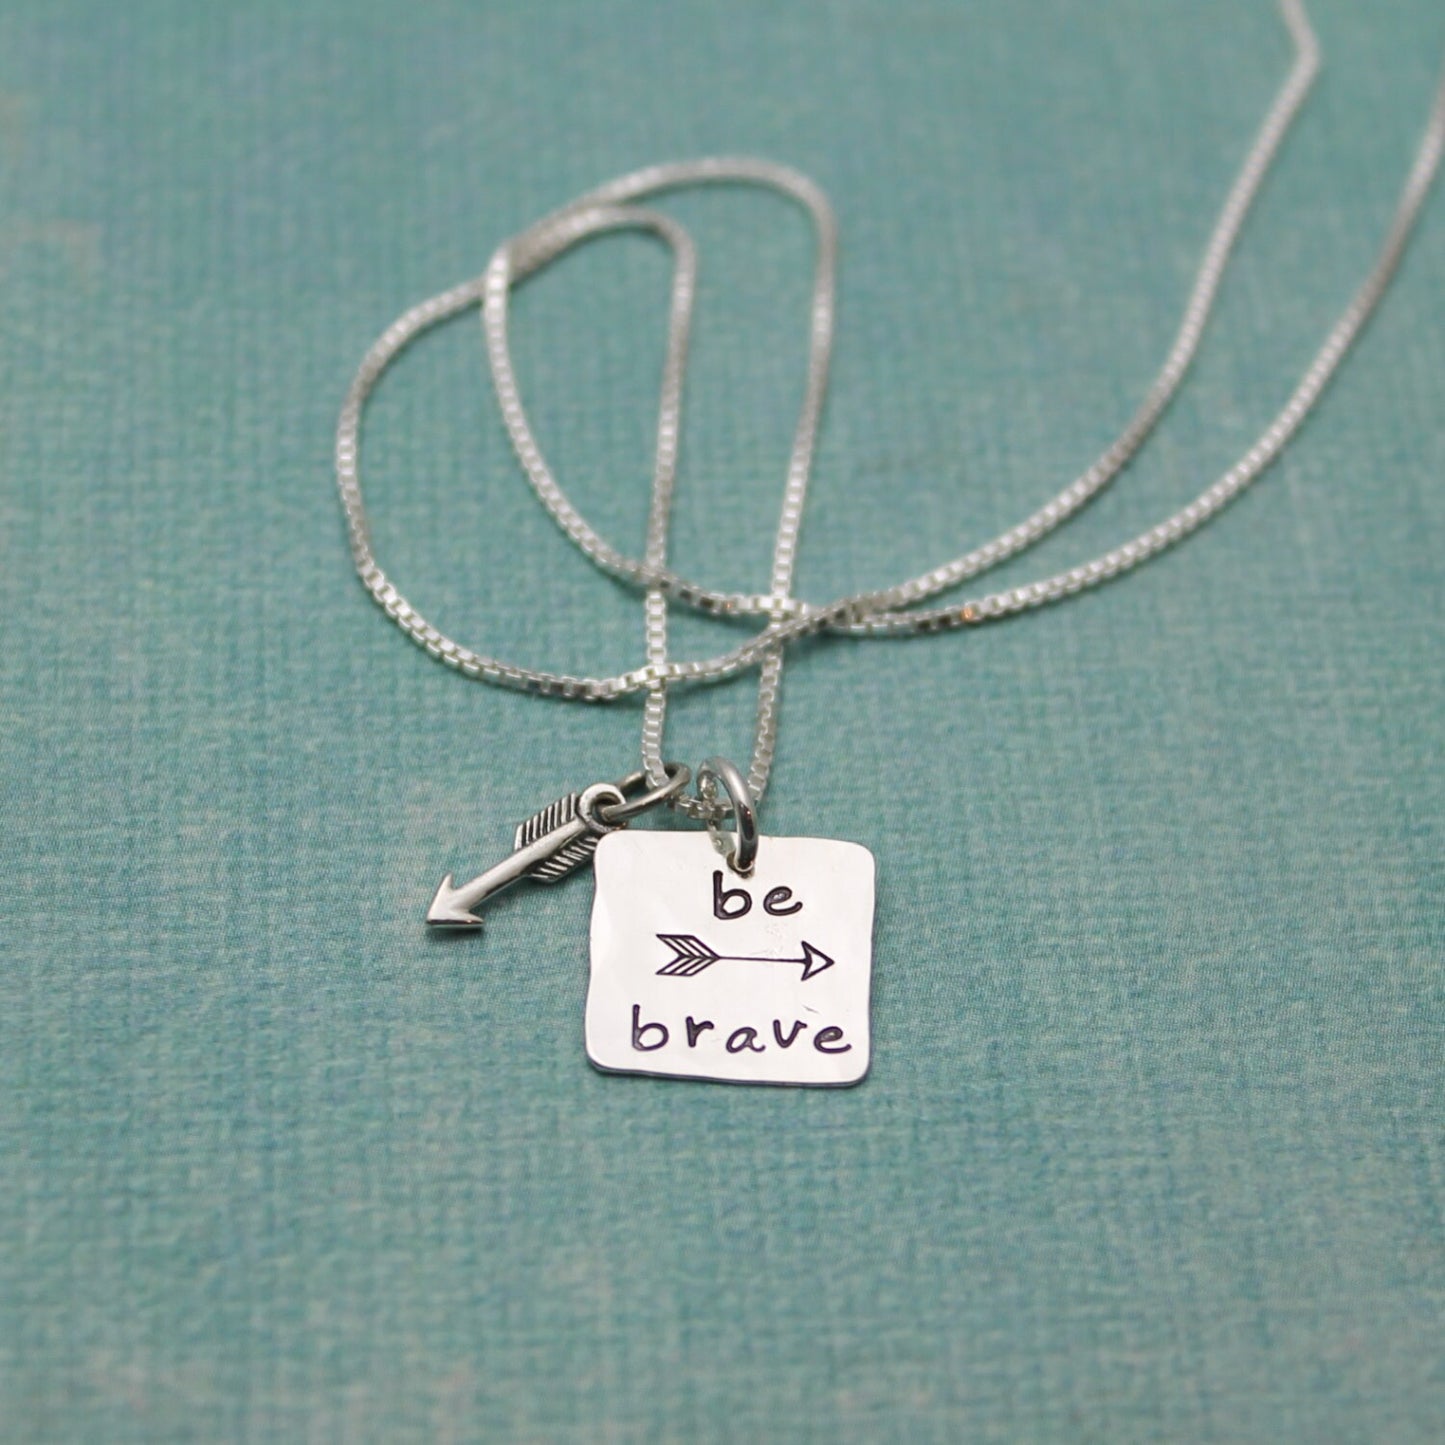 BE BRAVE Necklace - Encouragement Jewelry - Hand Stamped and Personalized - Sterling Silver